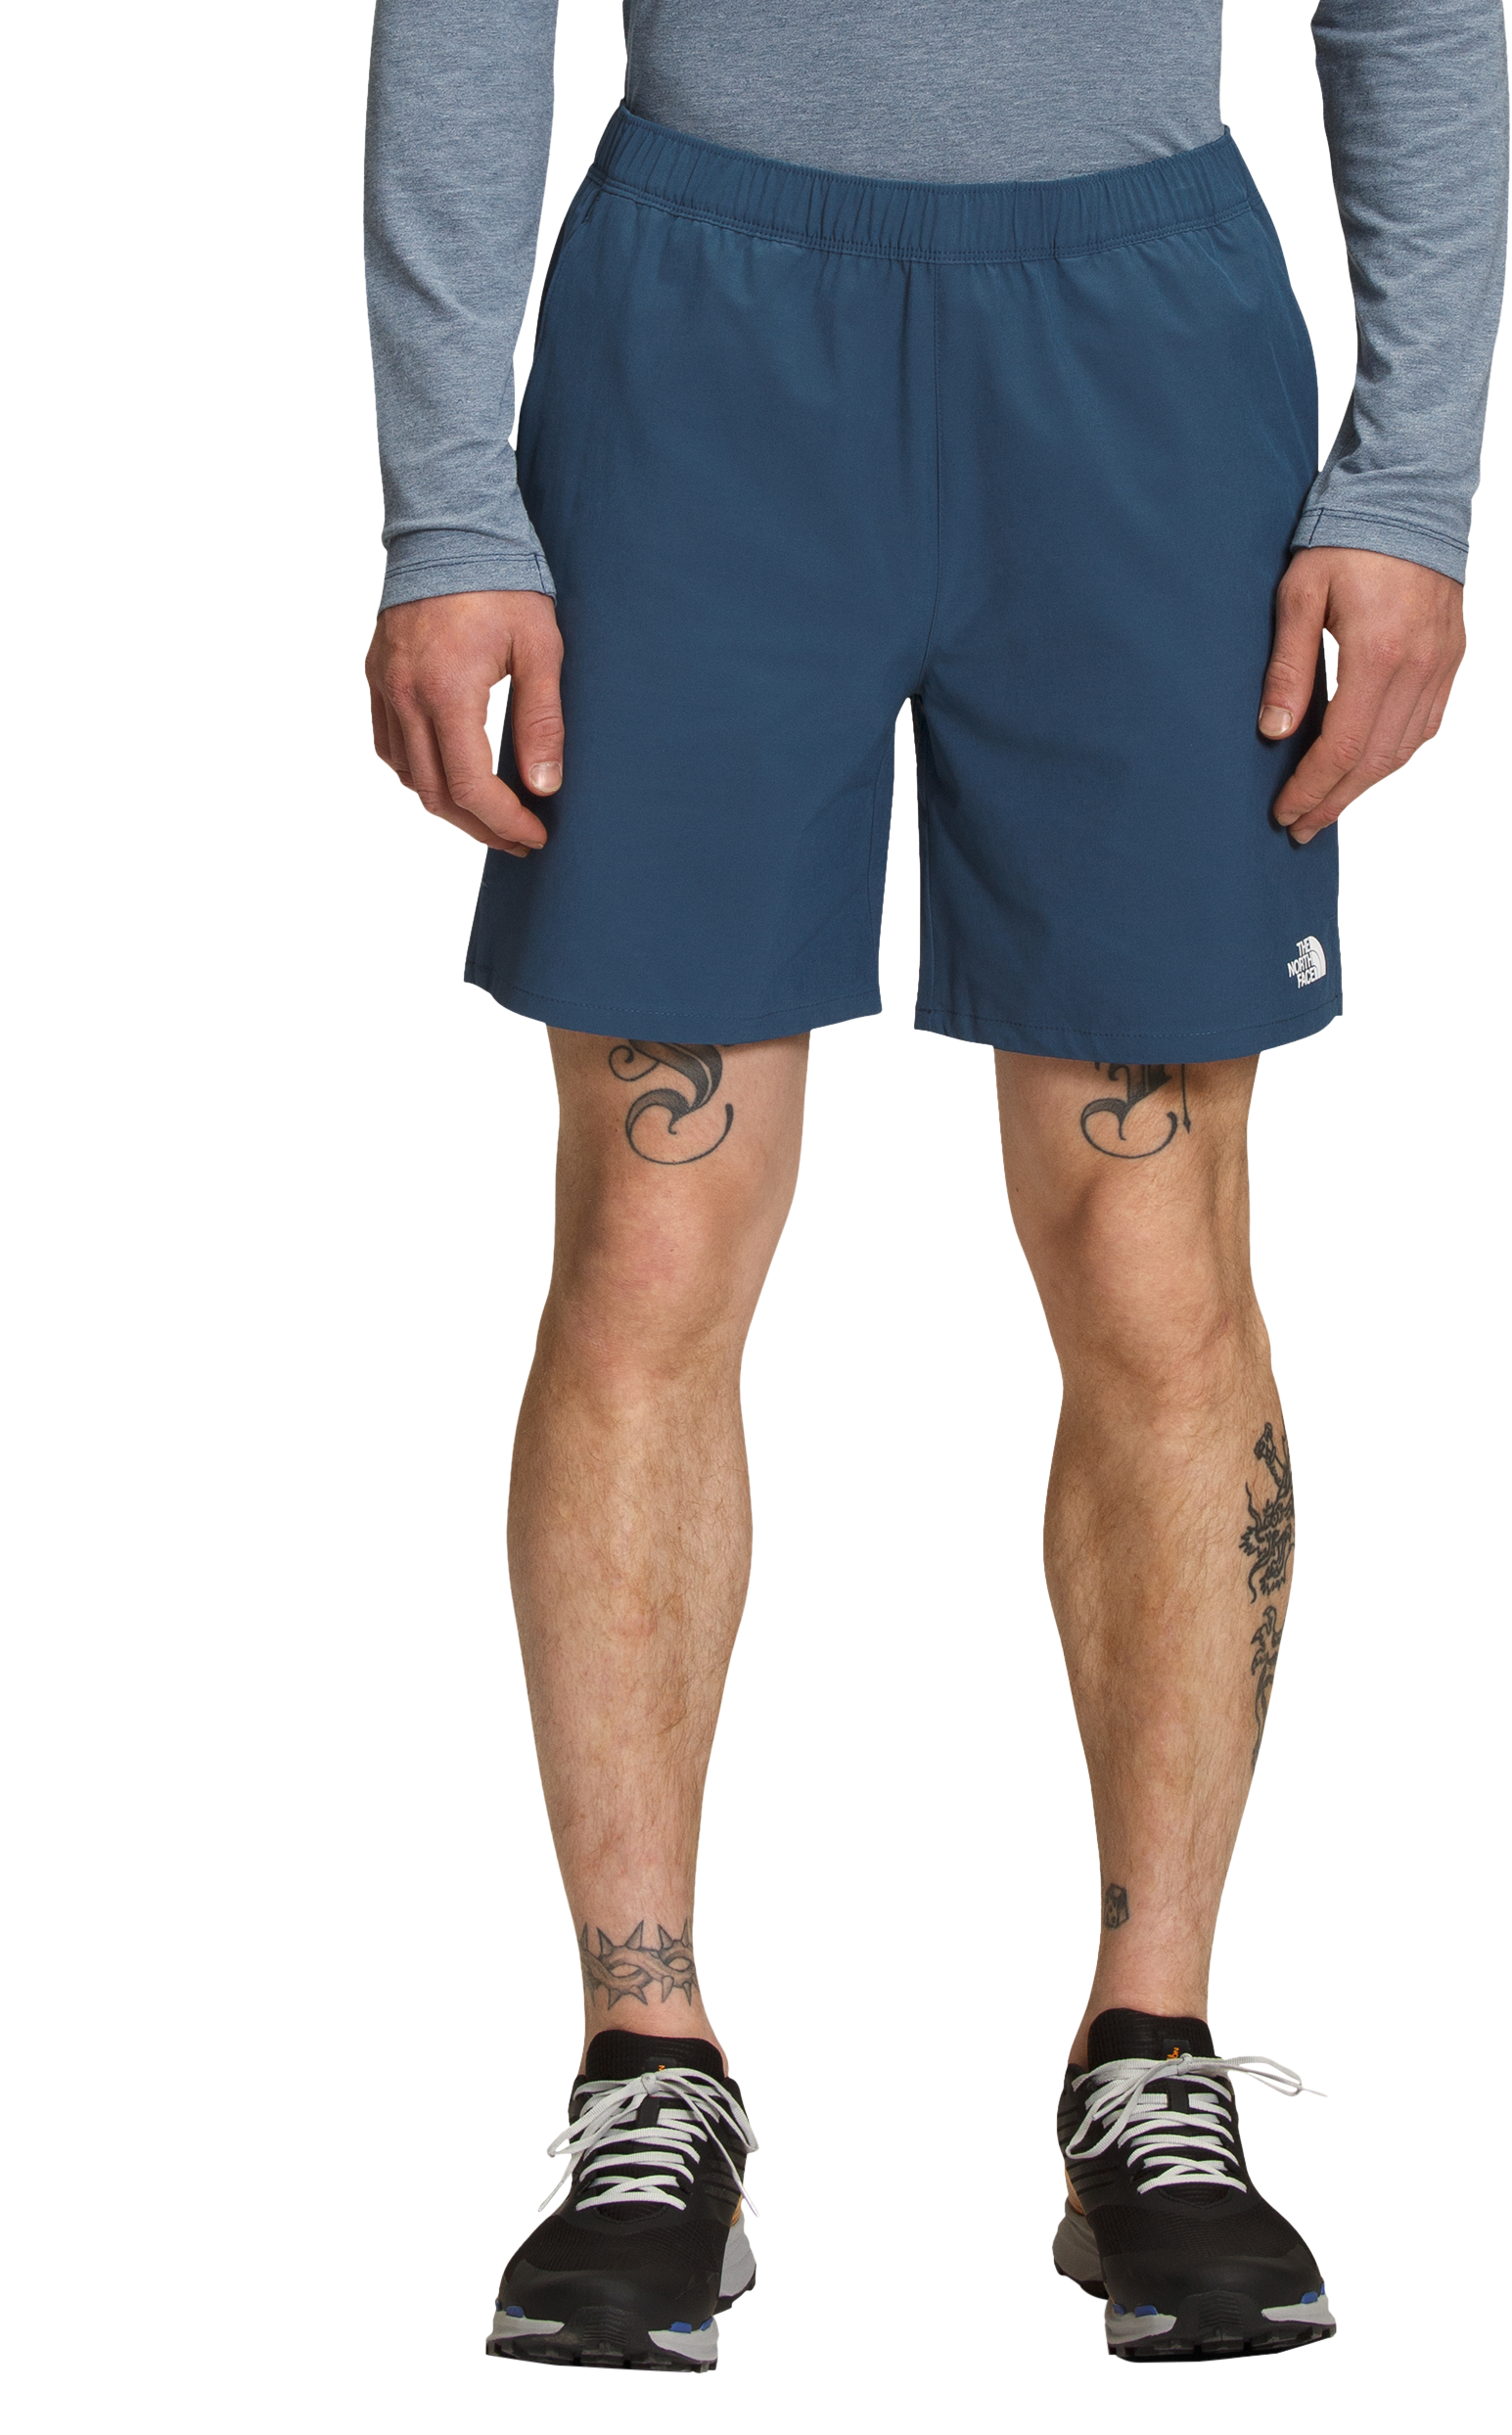 The North Face Wander Shorts for Men - Shady Blue - M